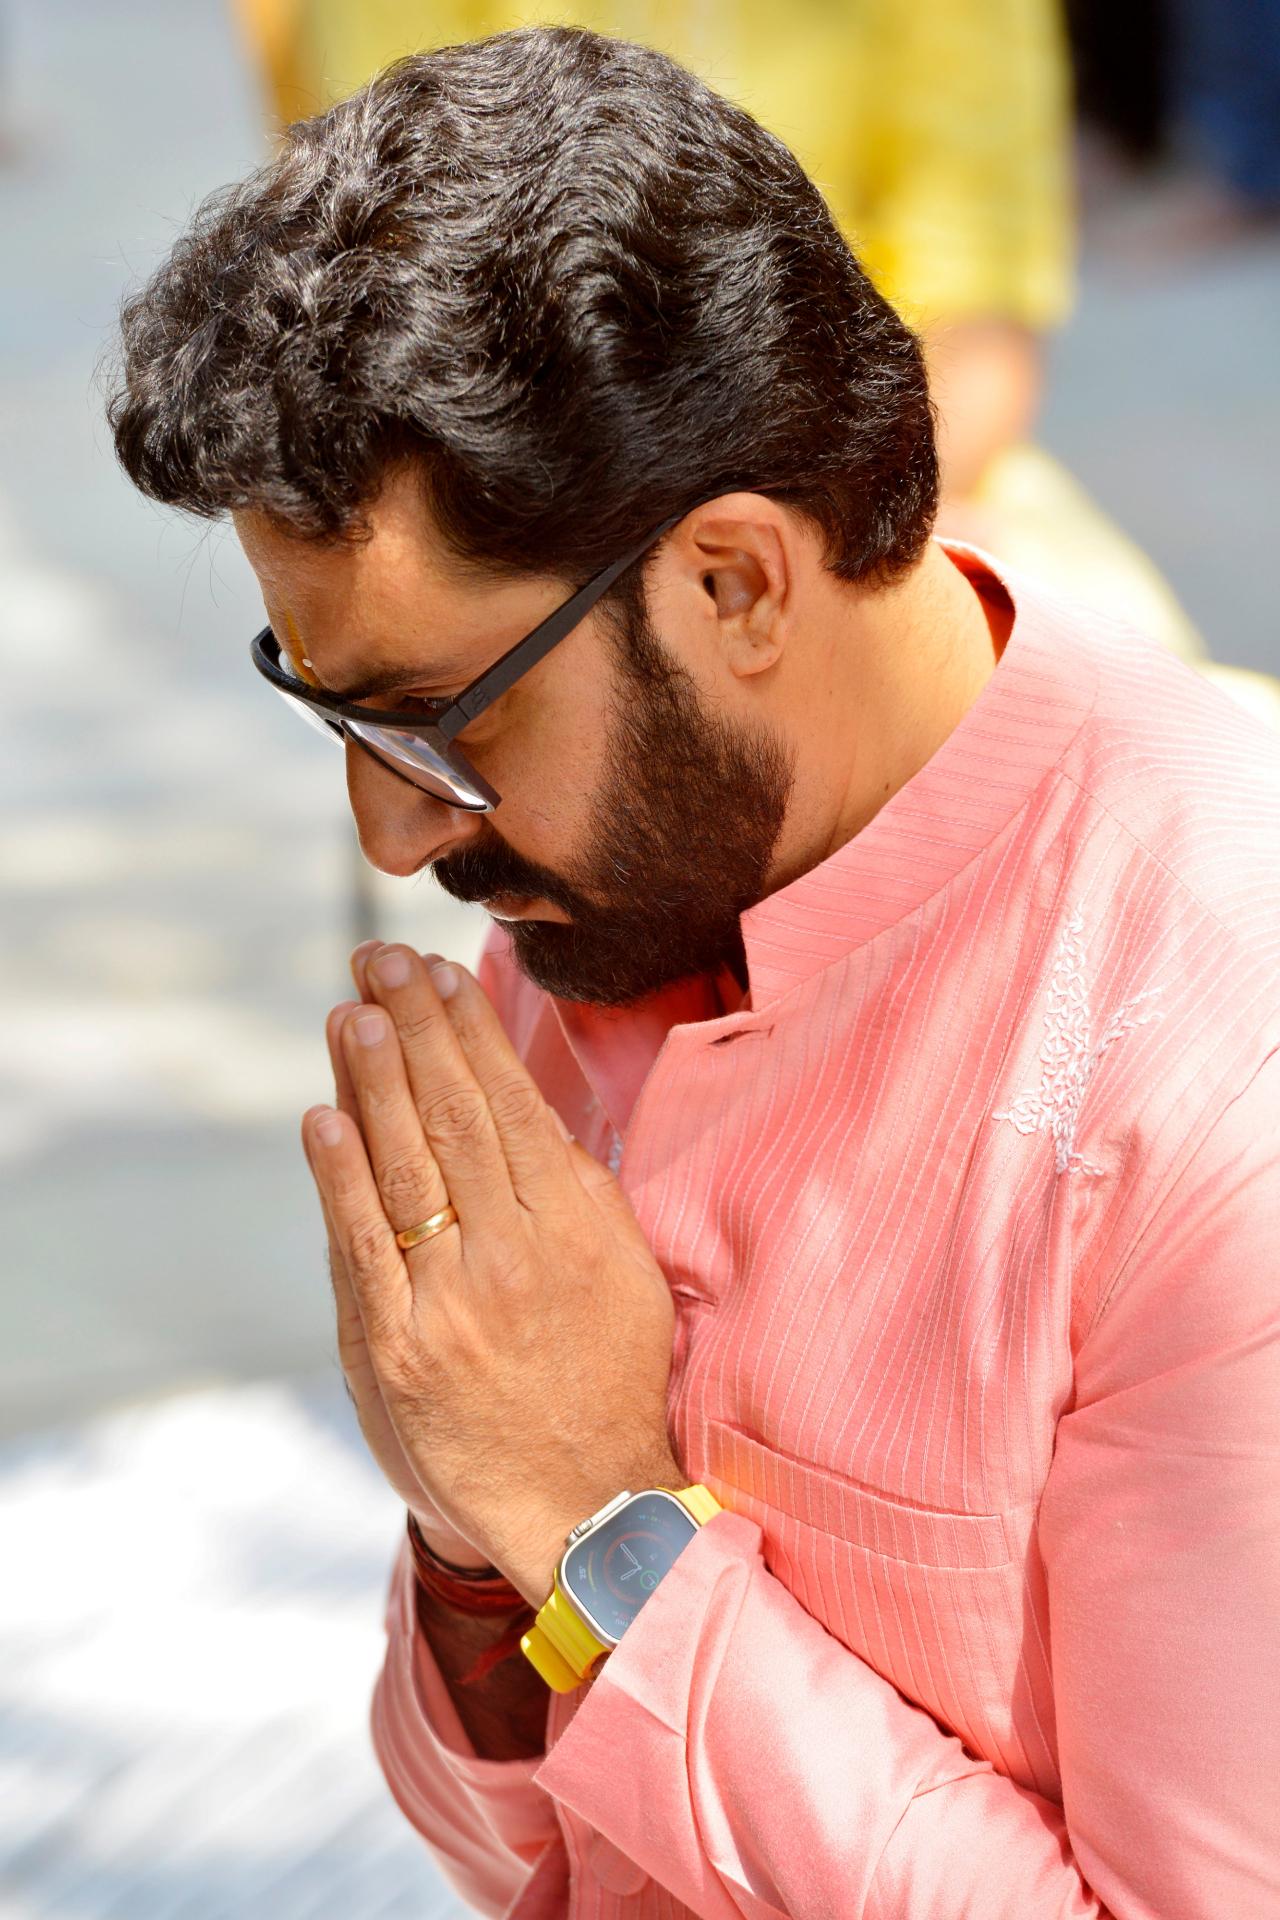 Abhishek opted for a pink kurta for the auspicious occasion. He also took to his social media handle to wish all on the occasion